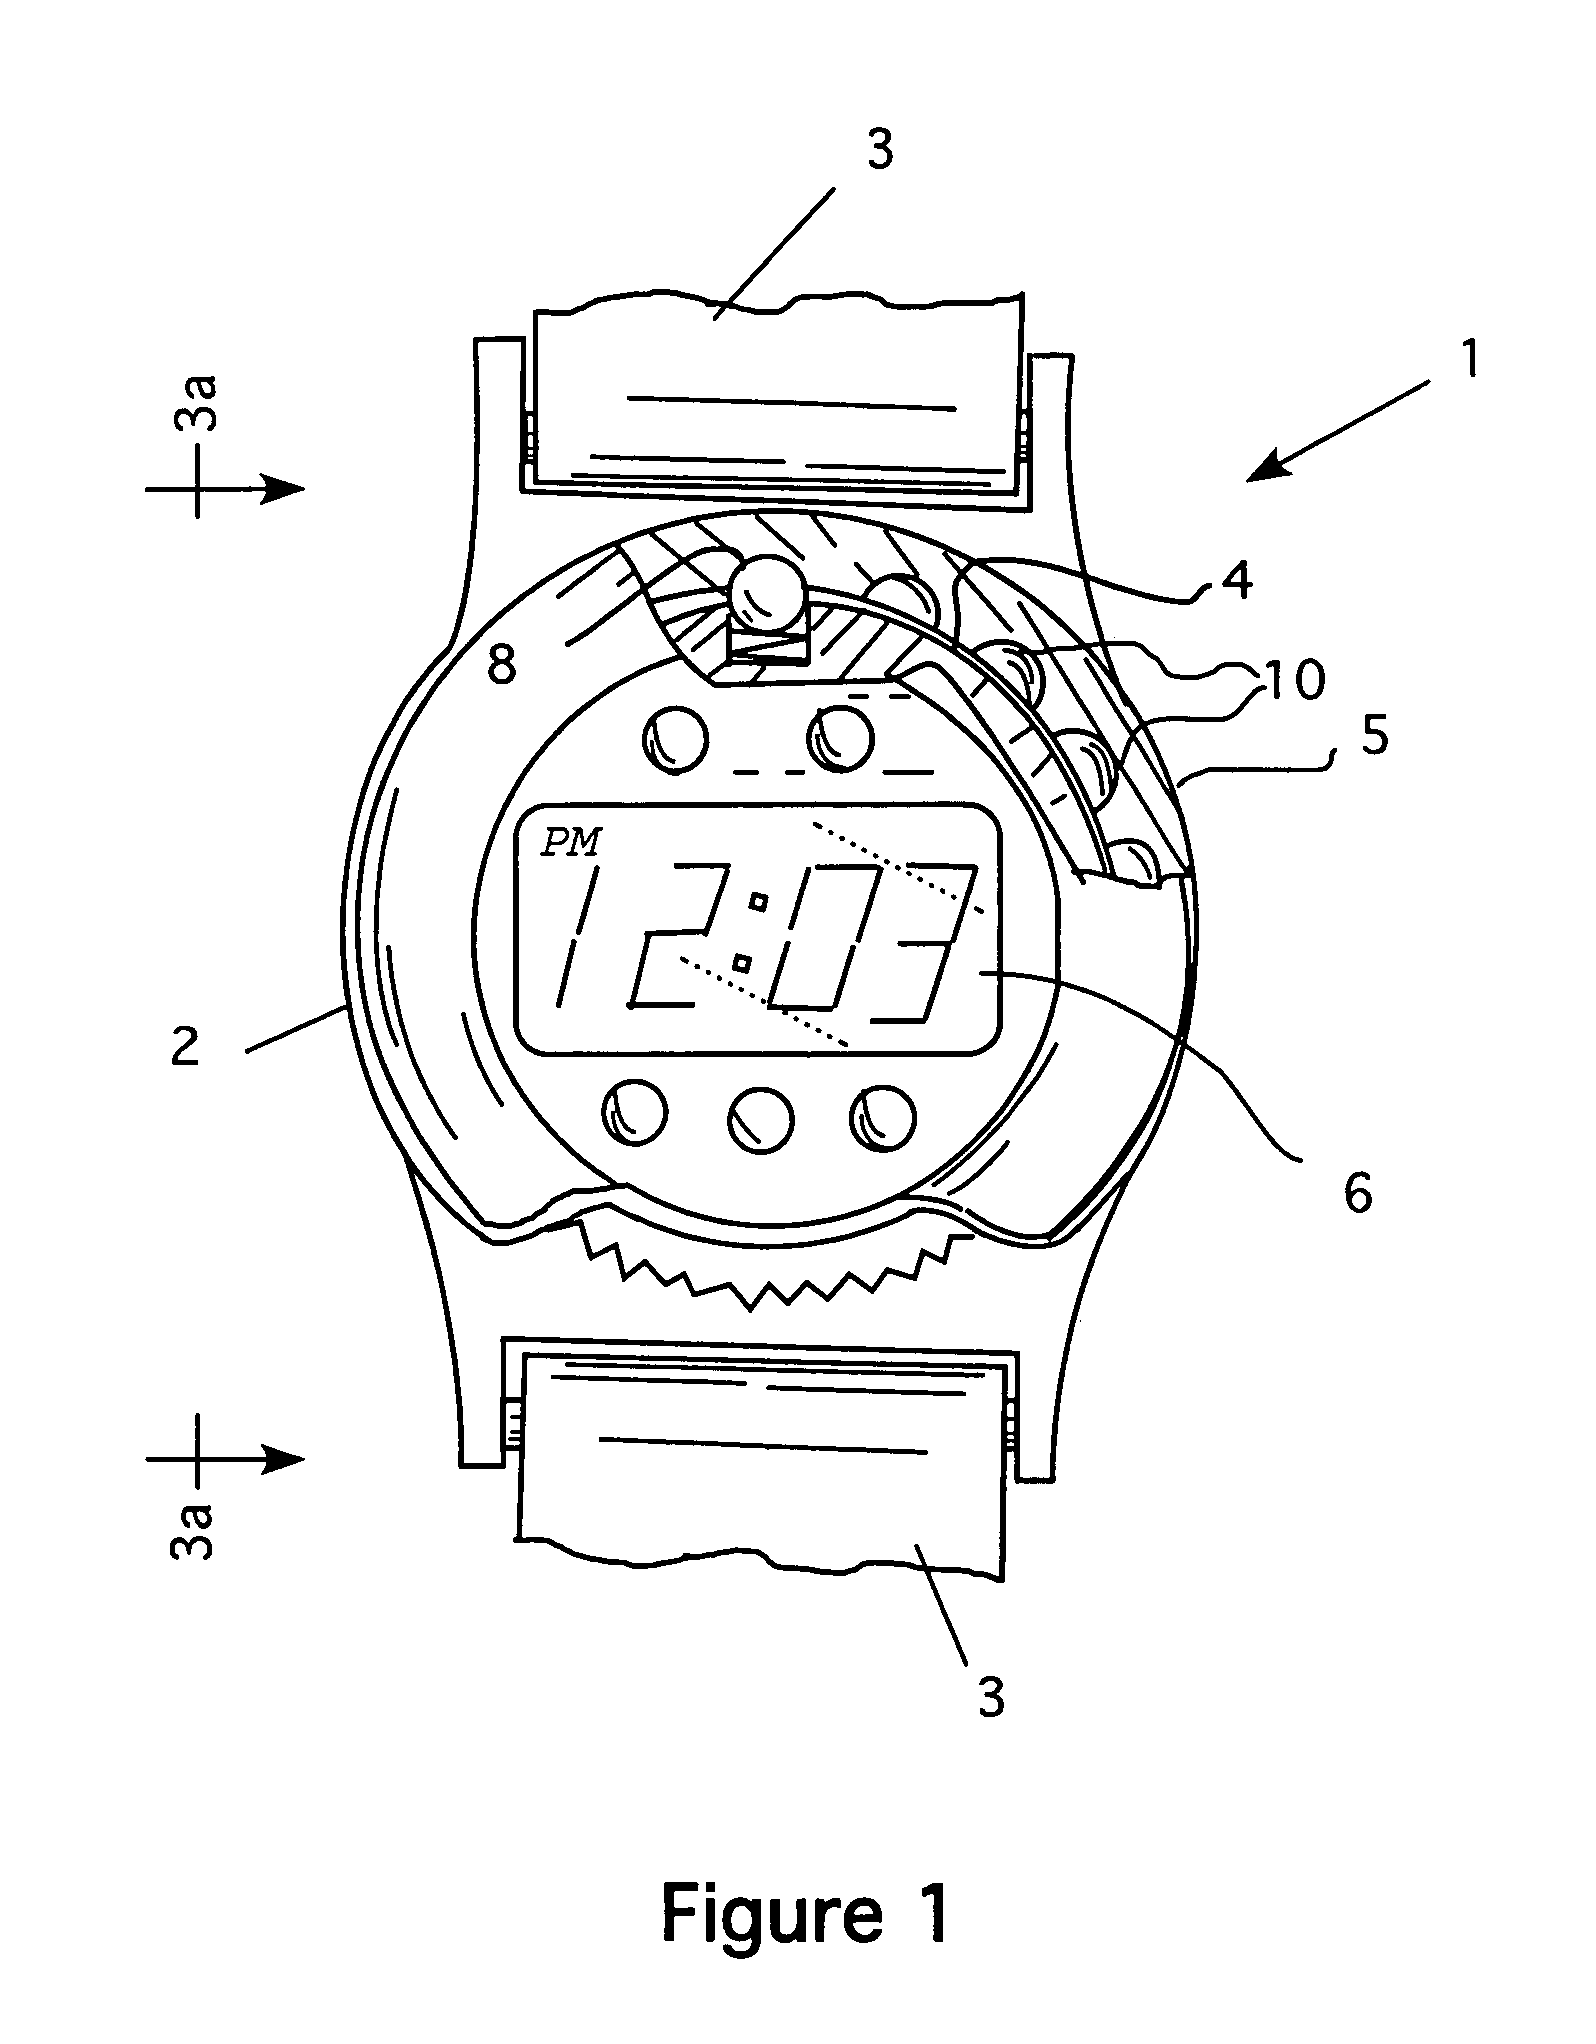 Wristwatch with movable movement case